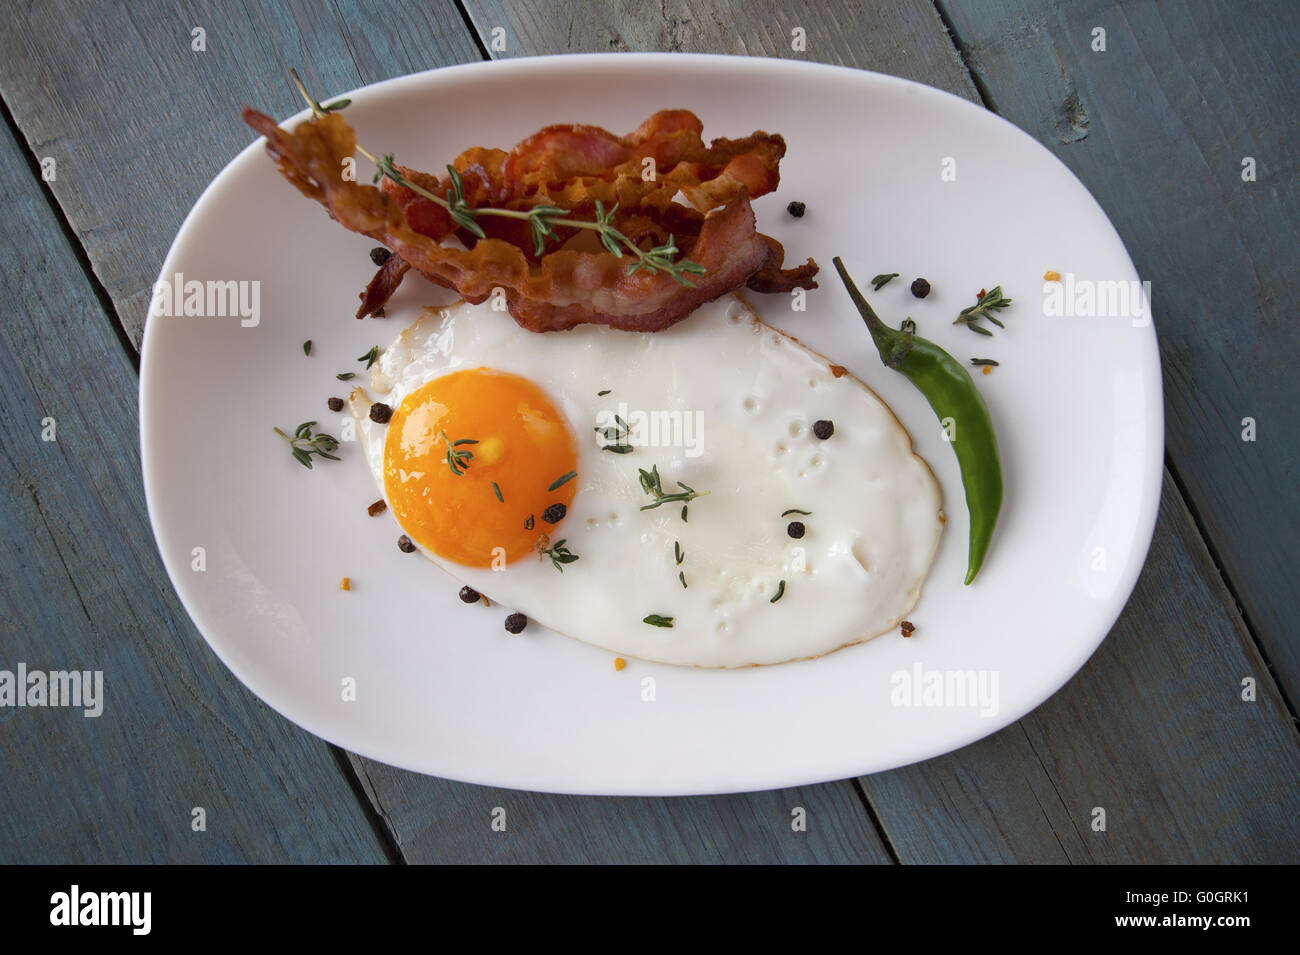 Breakfast. Fried eggs and bacon on an oval plate. Stock Photo